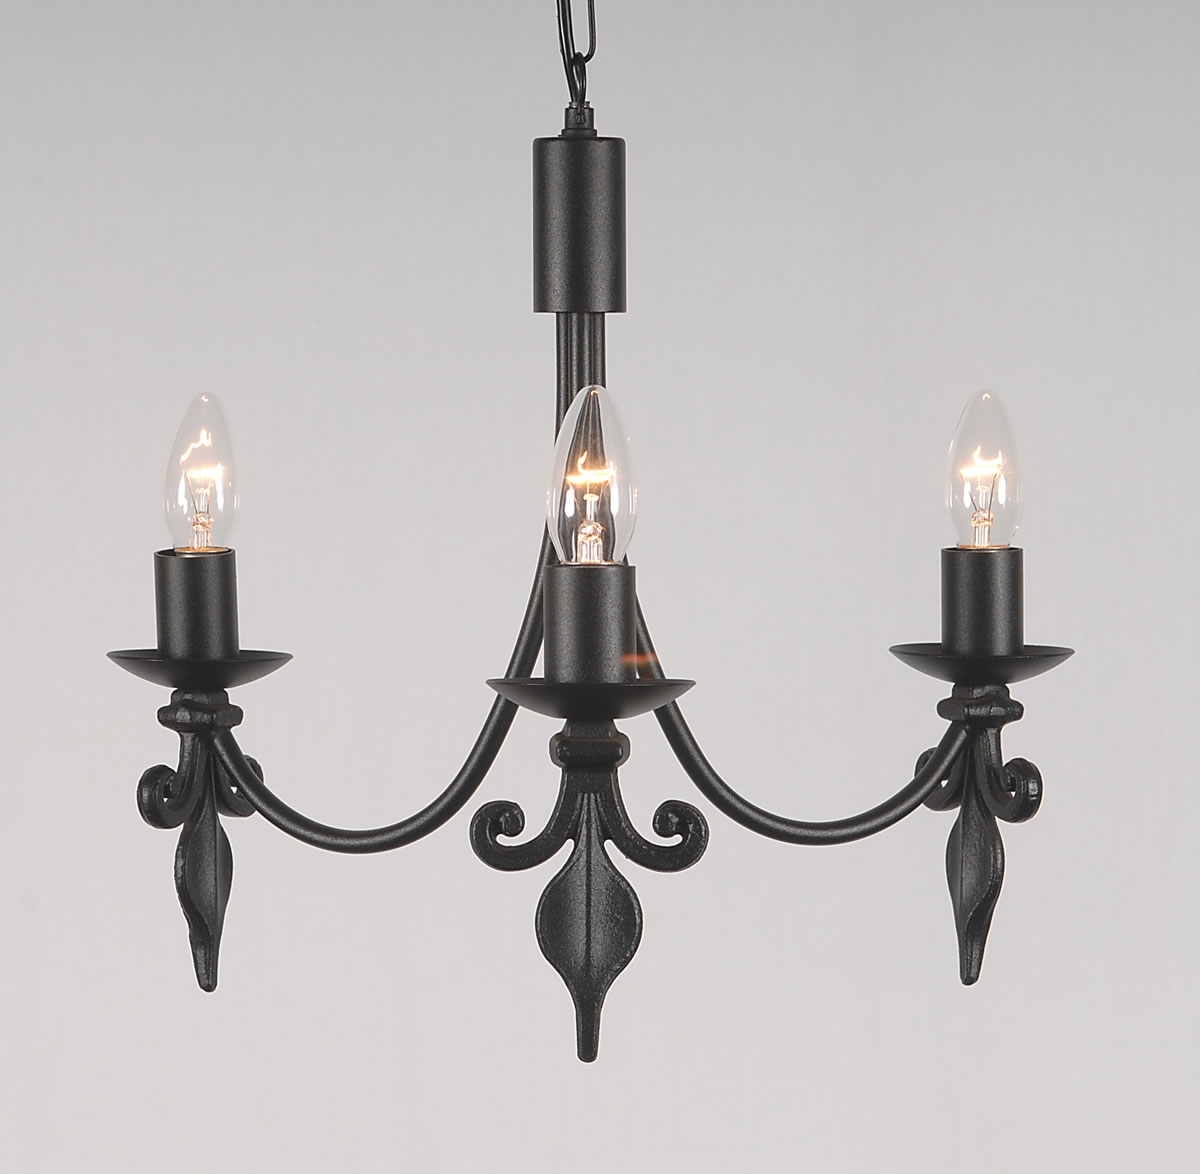 Permalink to Black Wrought Iron Ceiling Lights